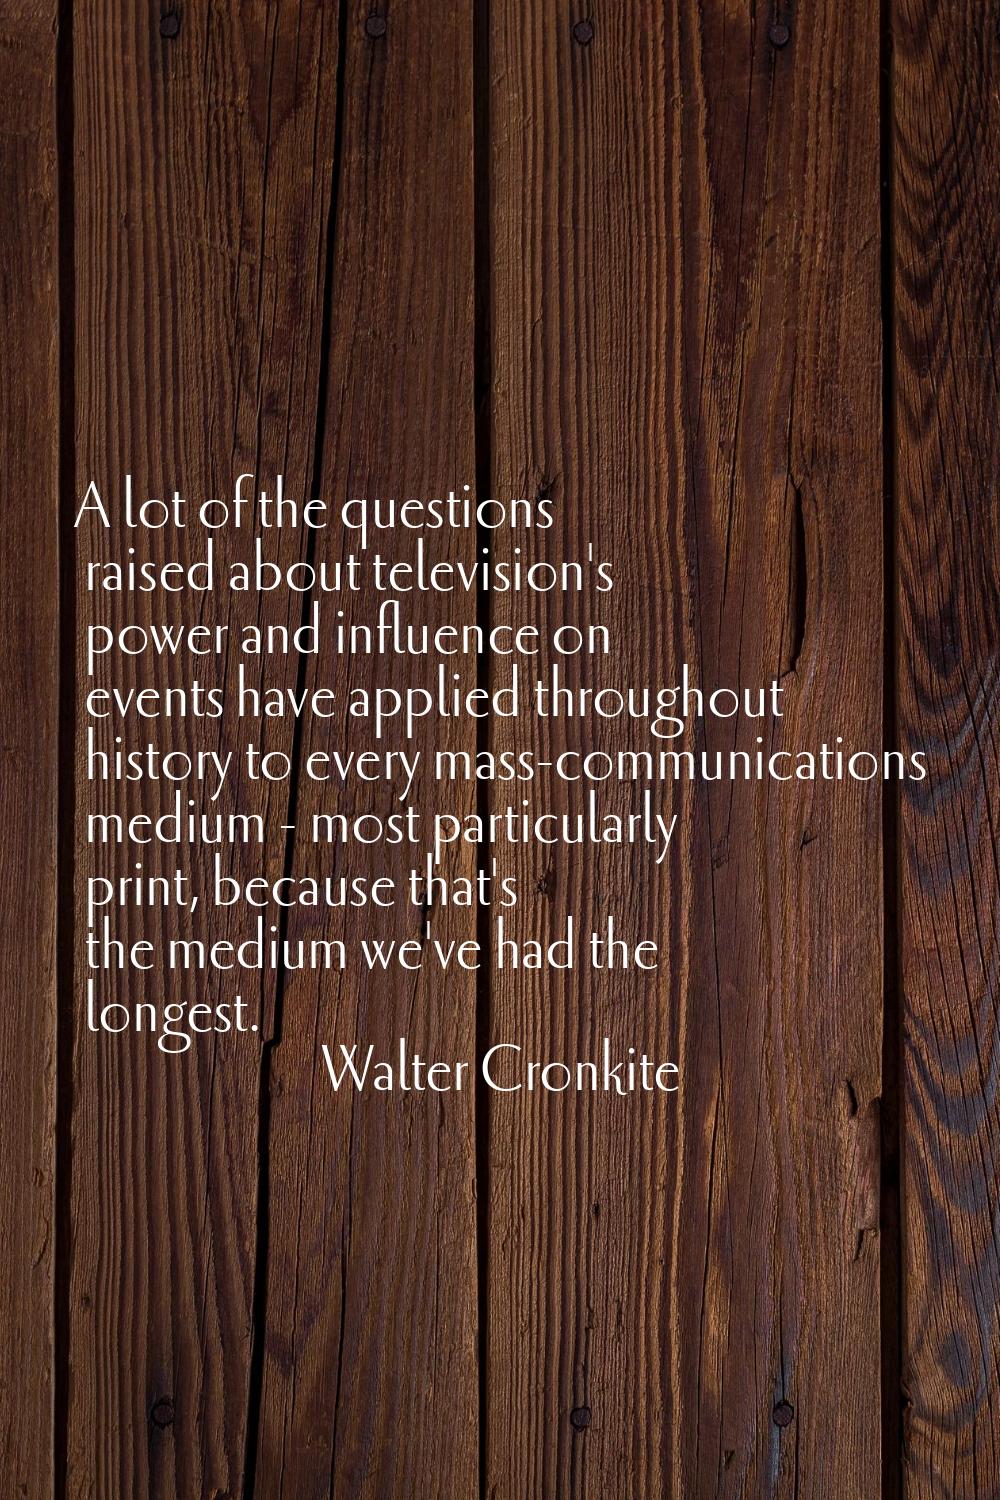 A lot of the questions raised about television's power and influence on events have applied through